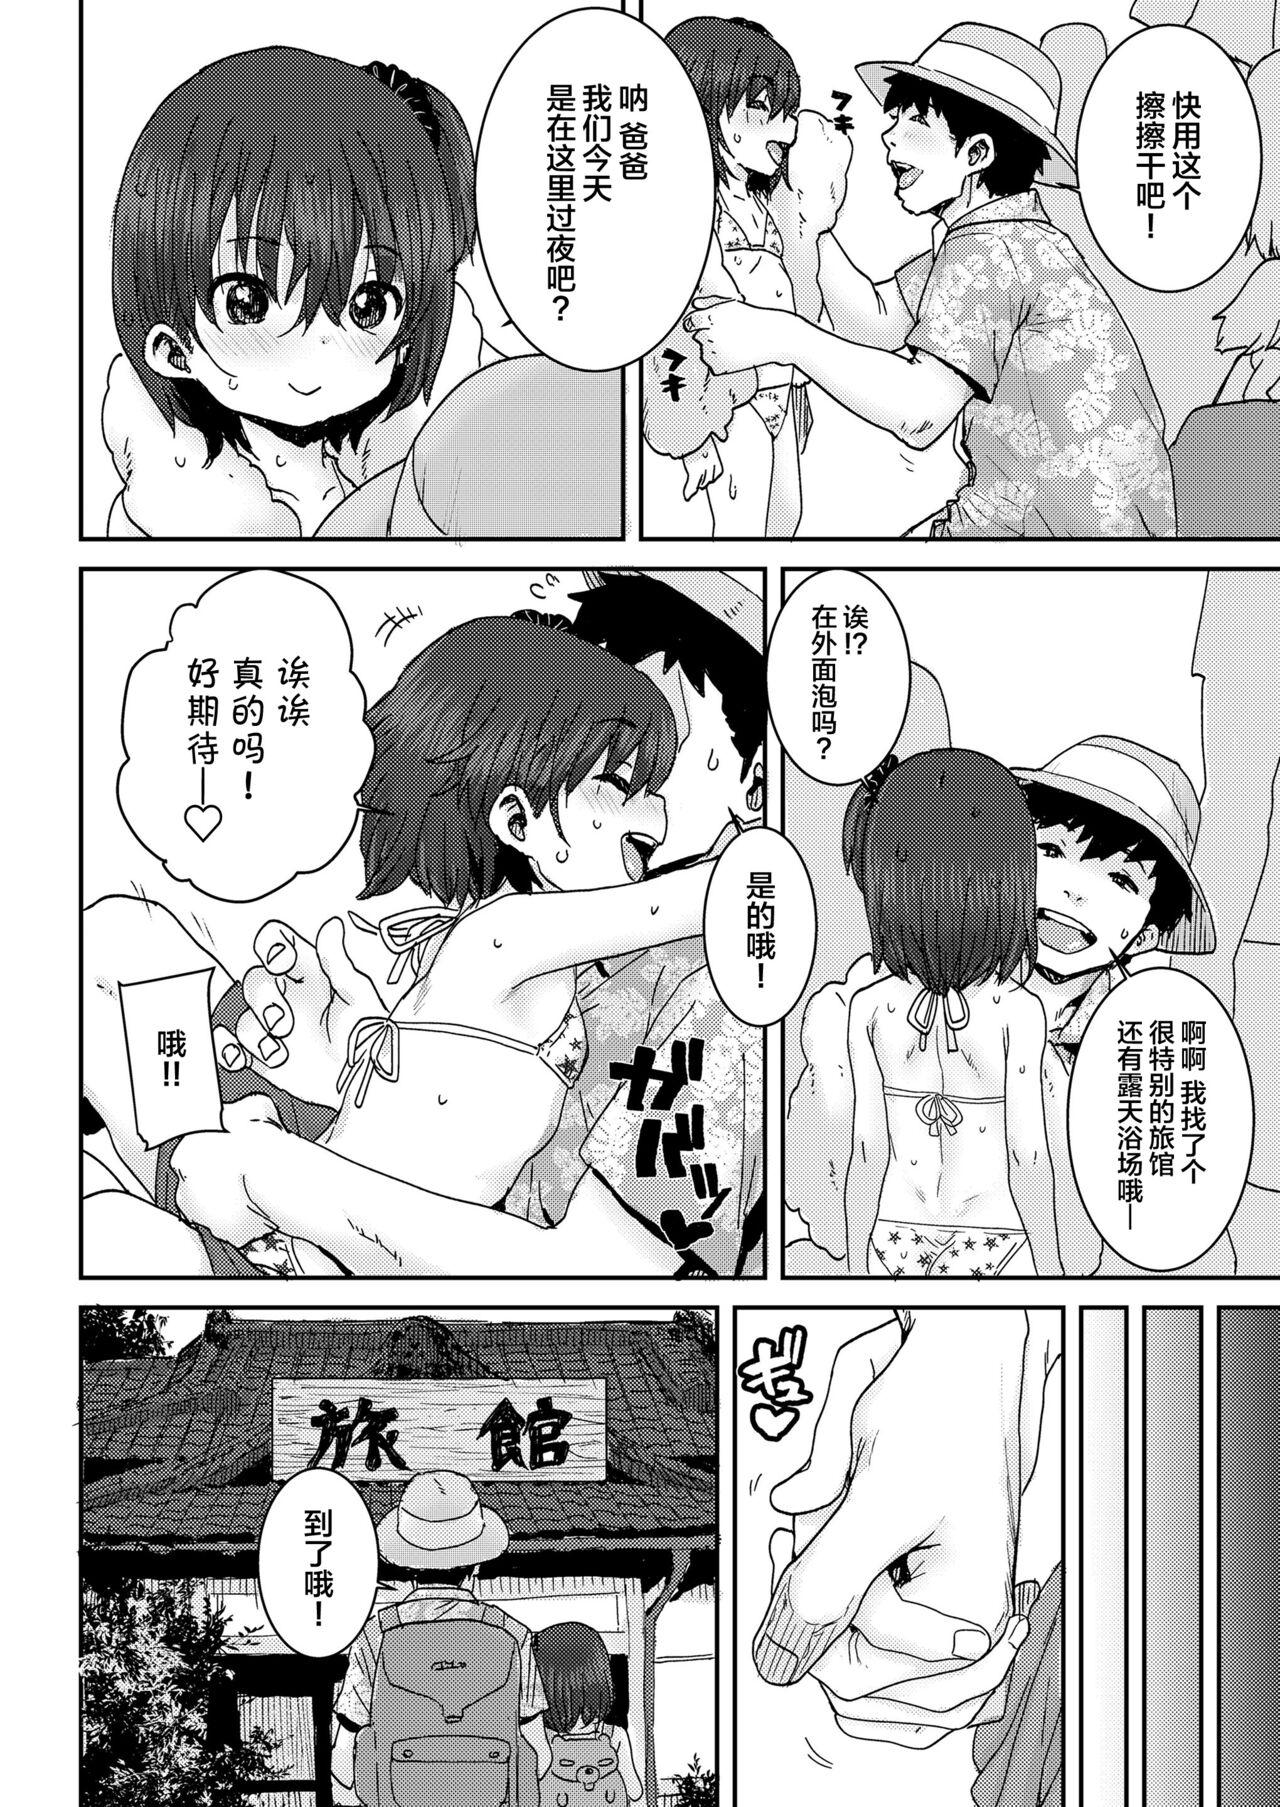 First Time Oyako Swapping Costume - Page 3